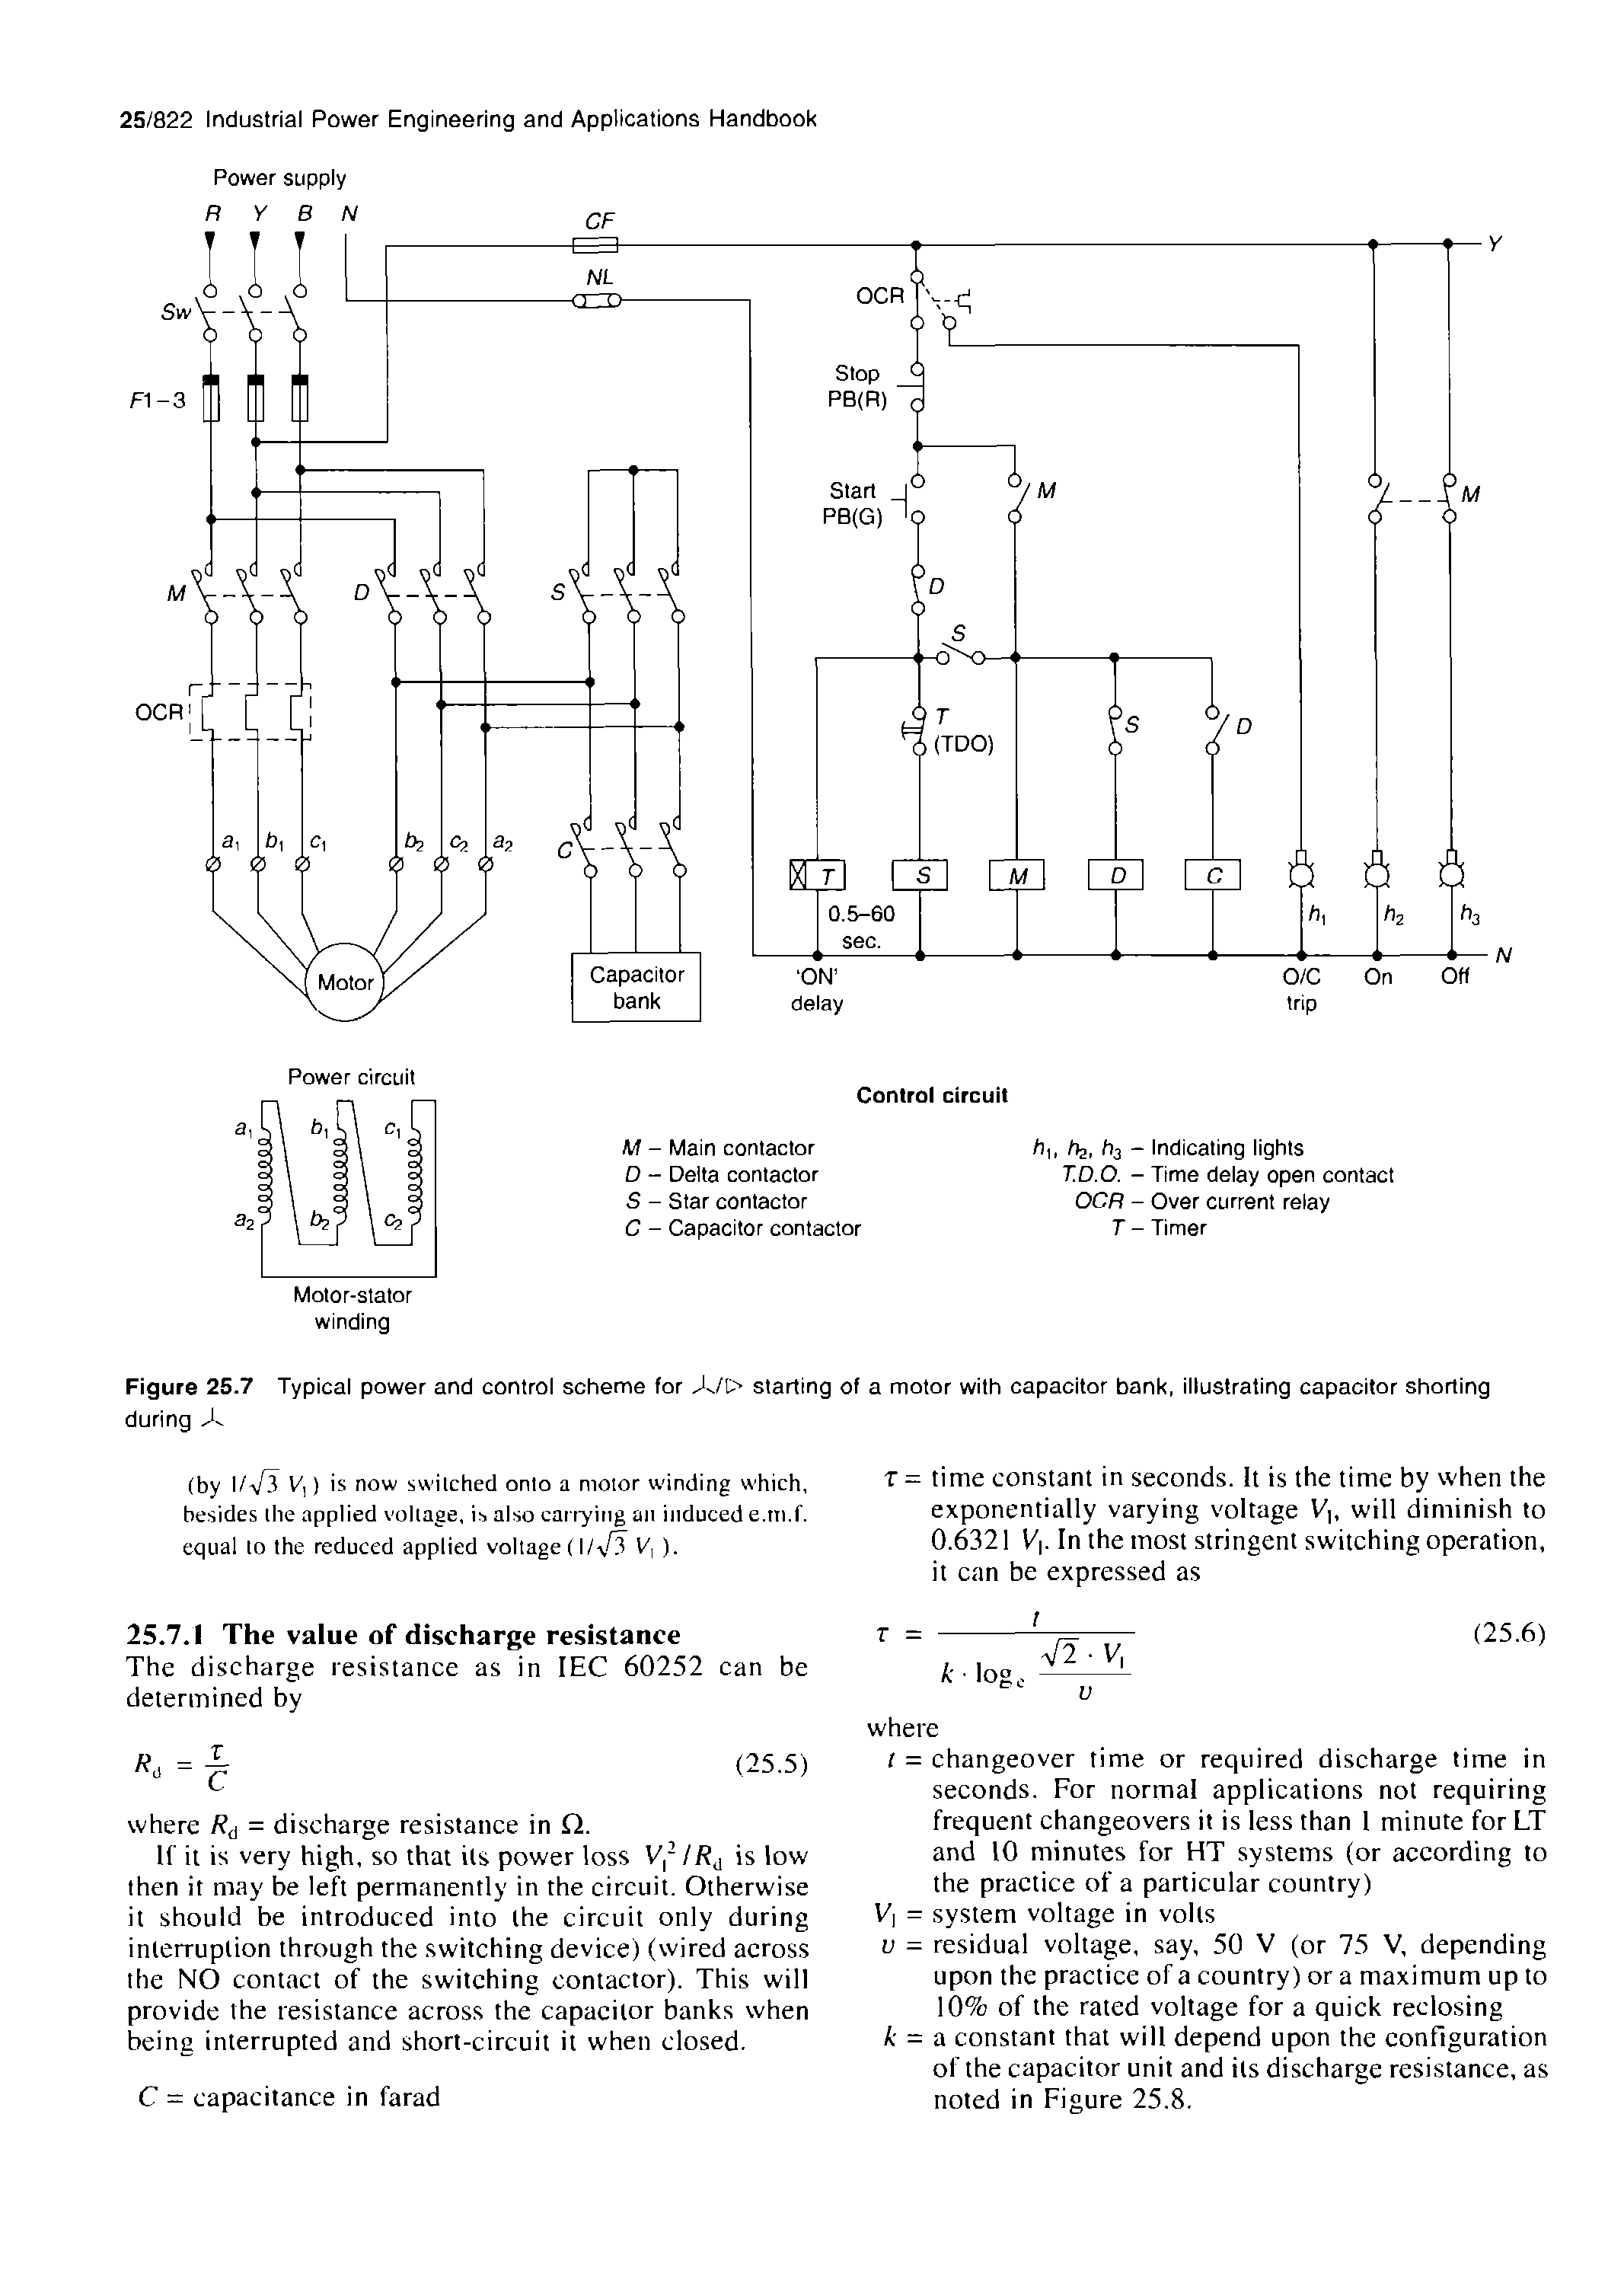 Figure 25.7 Typical power and control scheme for A/l> starting of a motor with capacitor bank, illustrating capacitor shorting during A...